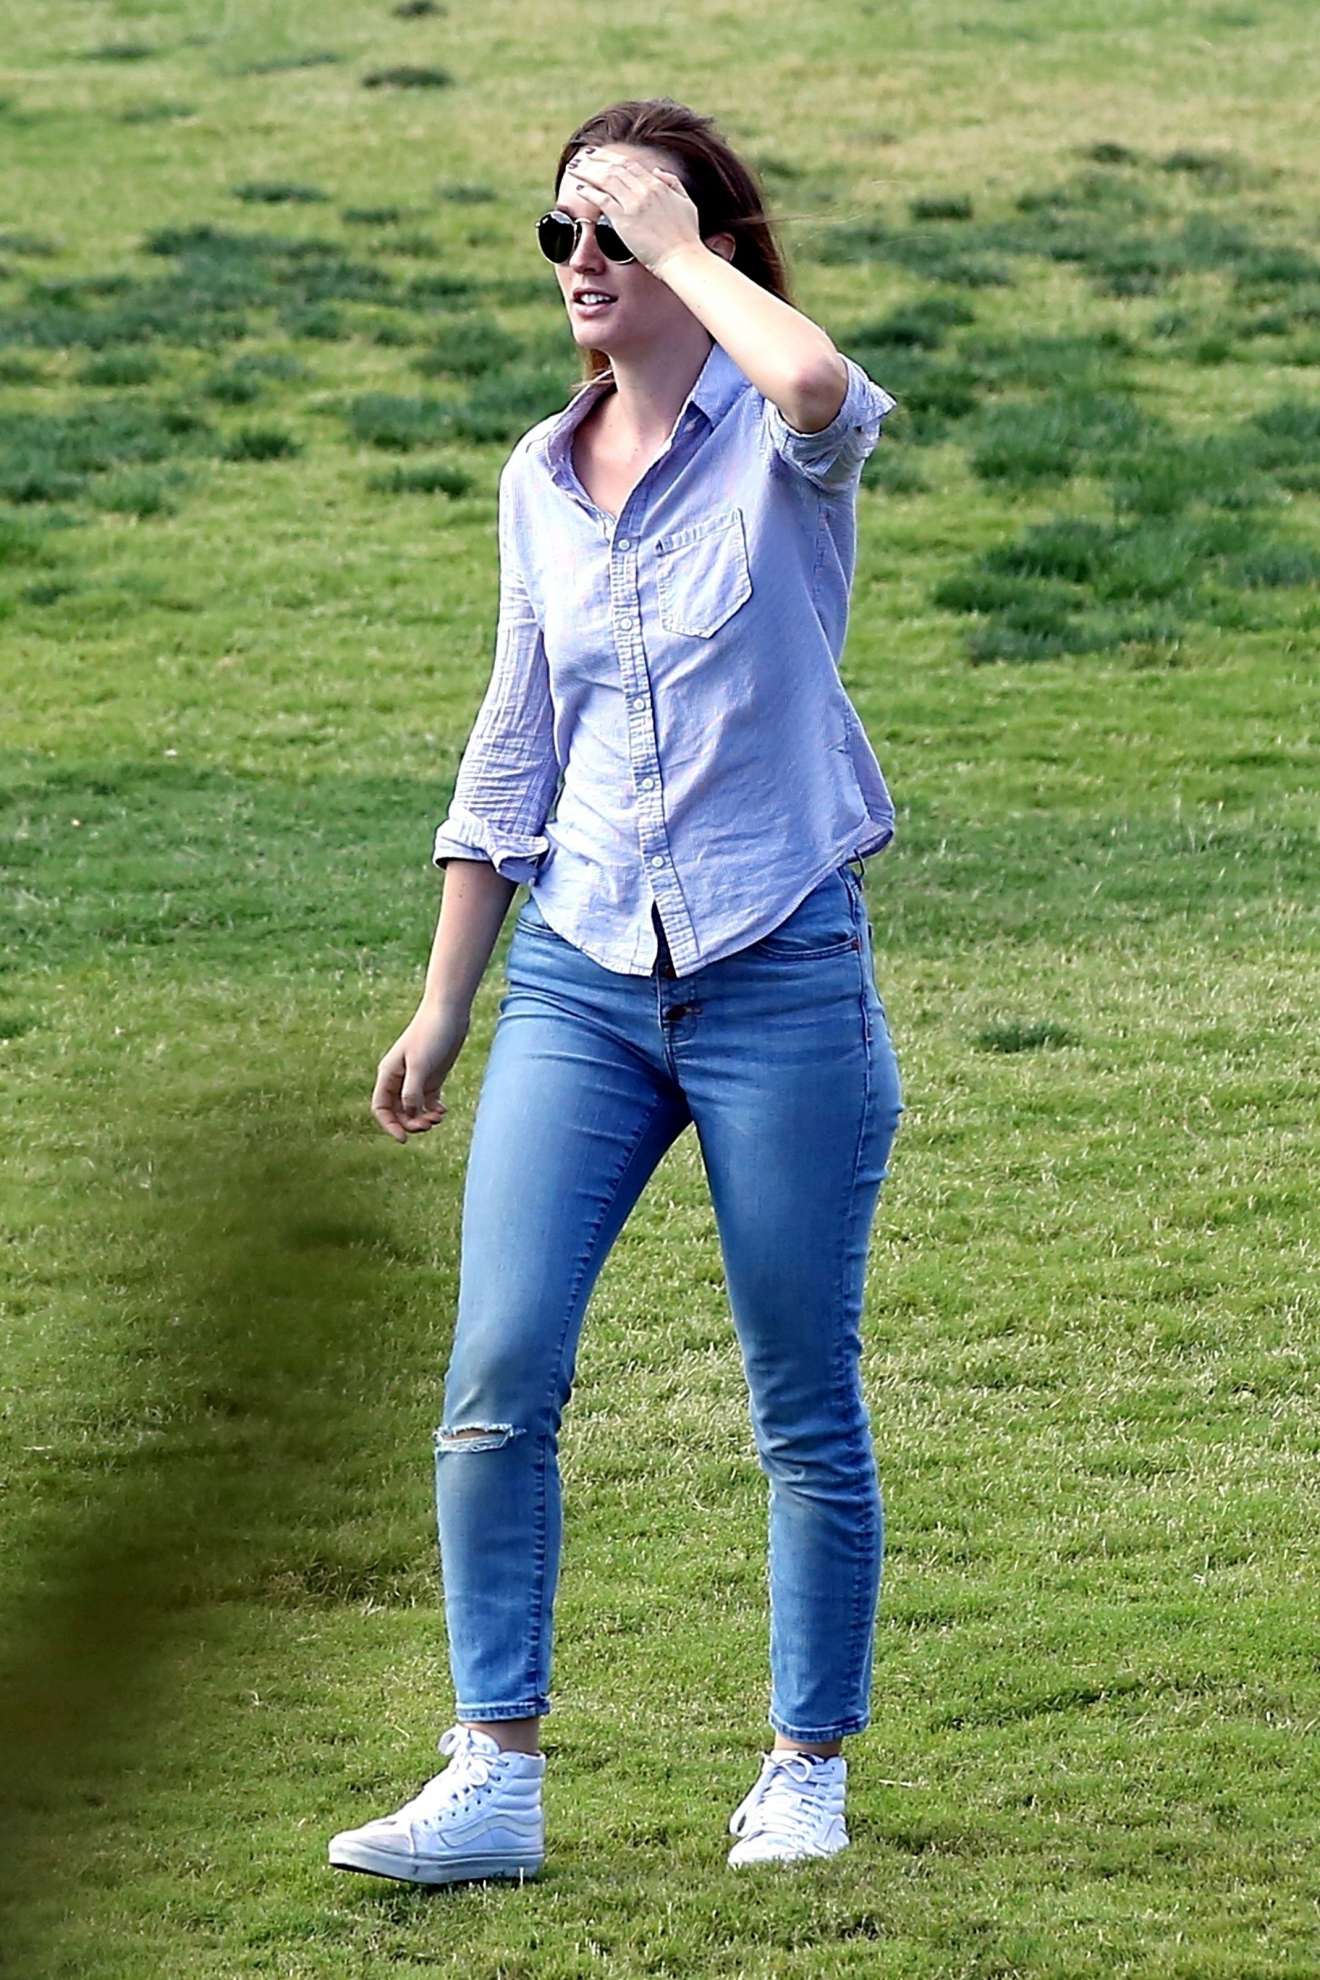 Leighton Meester - Seen at a park in LA.